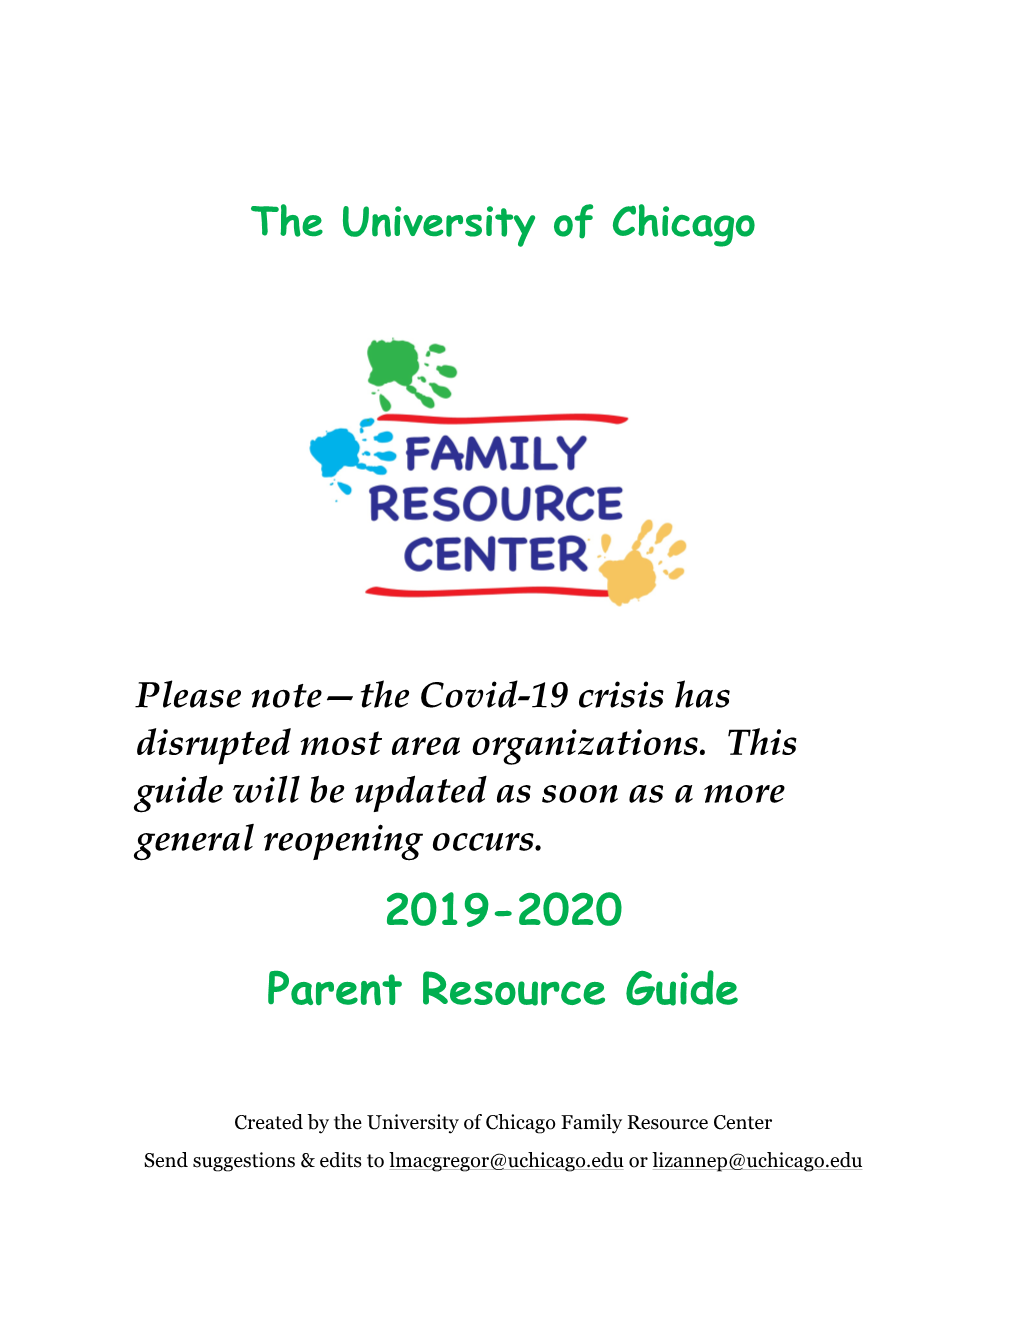 2019-2020 Parent Resource Guide